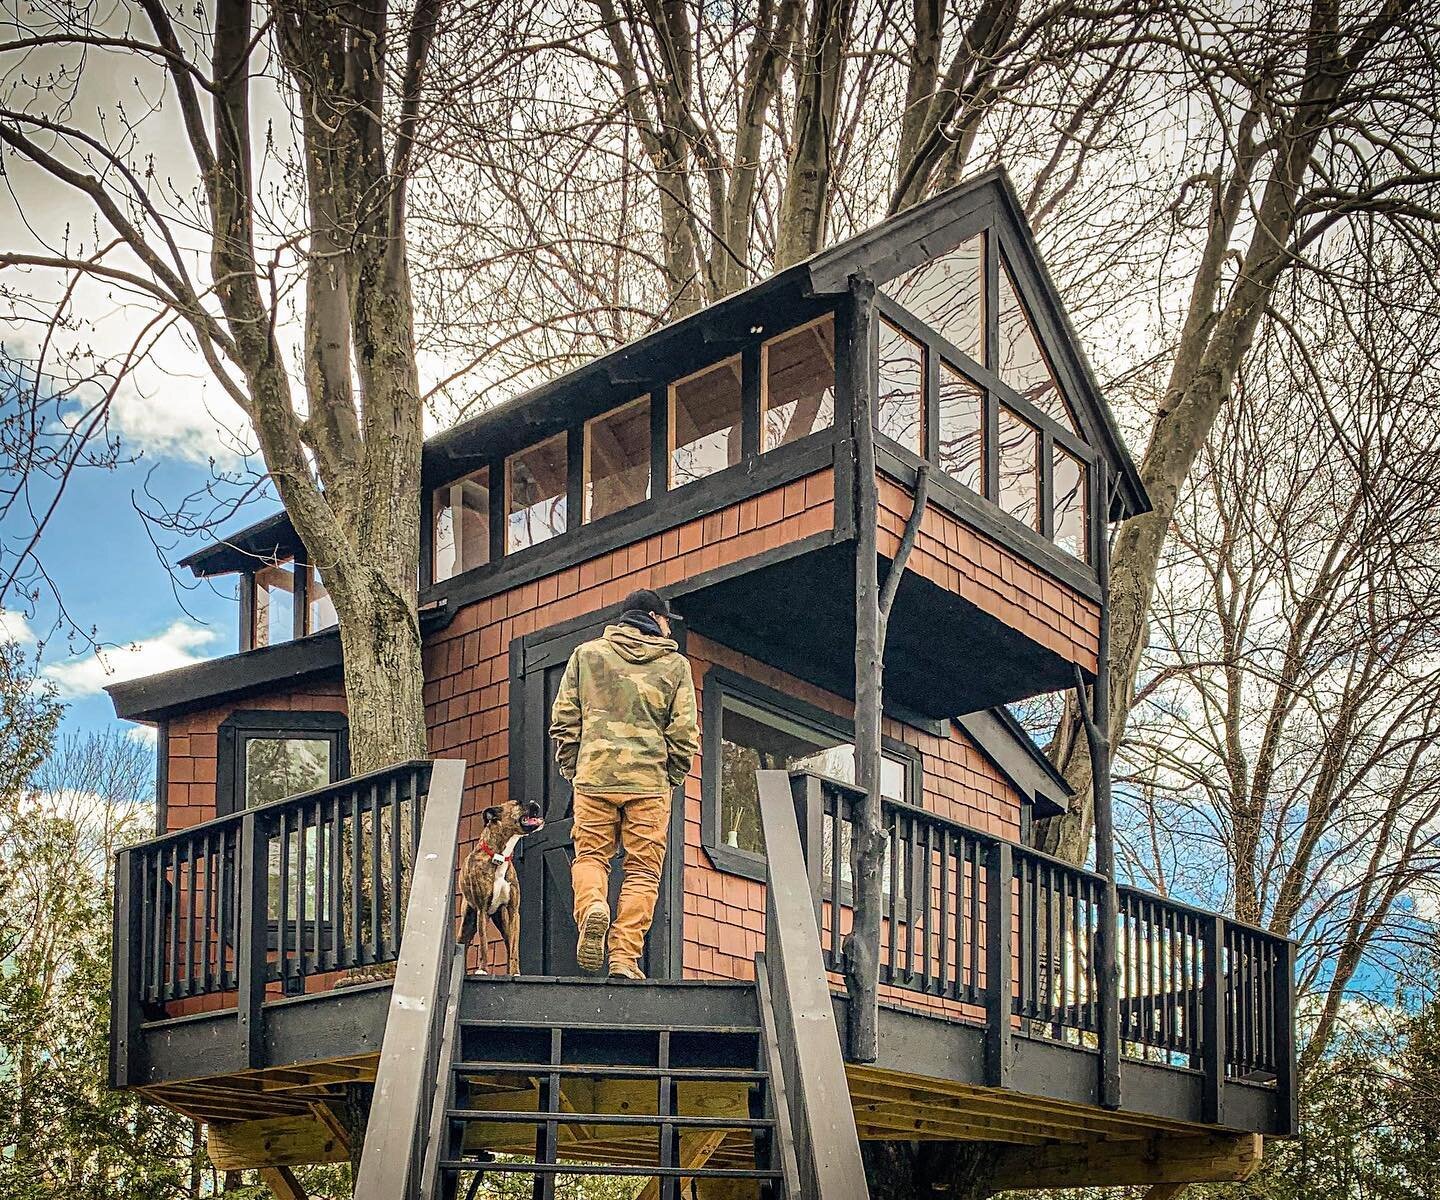 Sometimes when I get involved in a project, I get a little too enthusiastic. My daughter wanted a treehouse. I made a tree condo. I was desperately searching for a way to stay sober after many years of drug abuse. In my youth I would destroy..... may